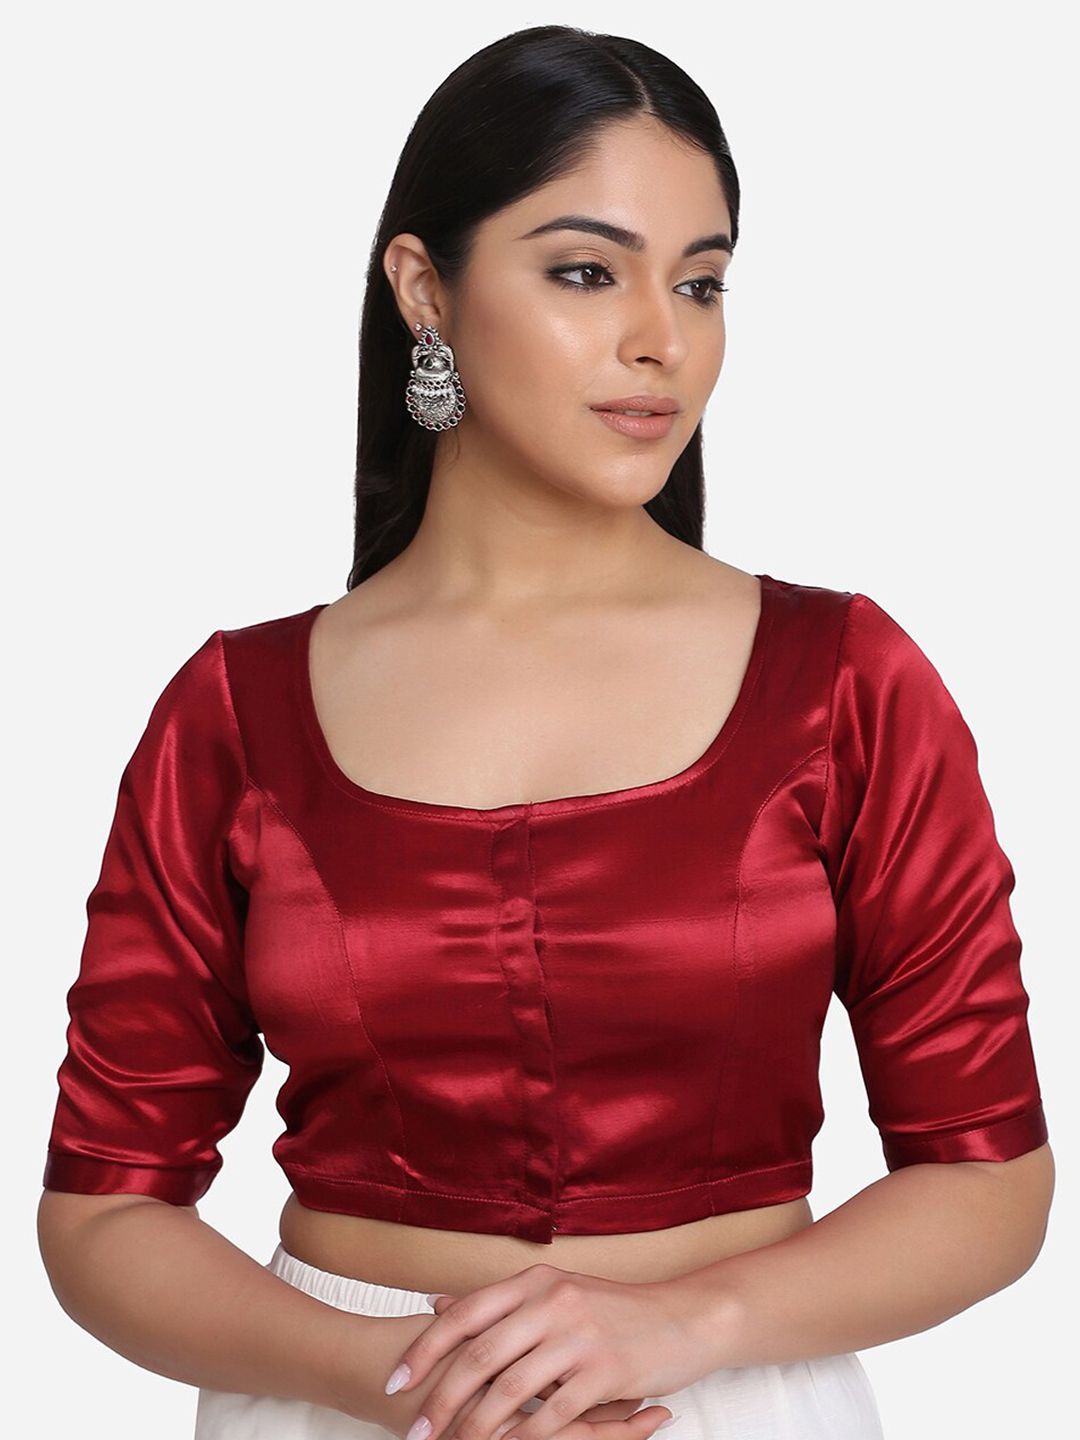 THE WEAVE TRAVELLER Women Maroon Solid Readymade Saree Blouse Price in India